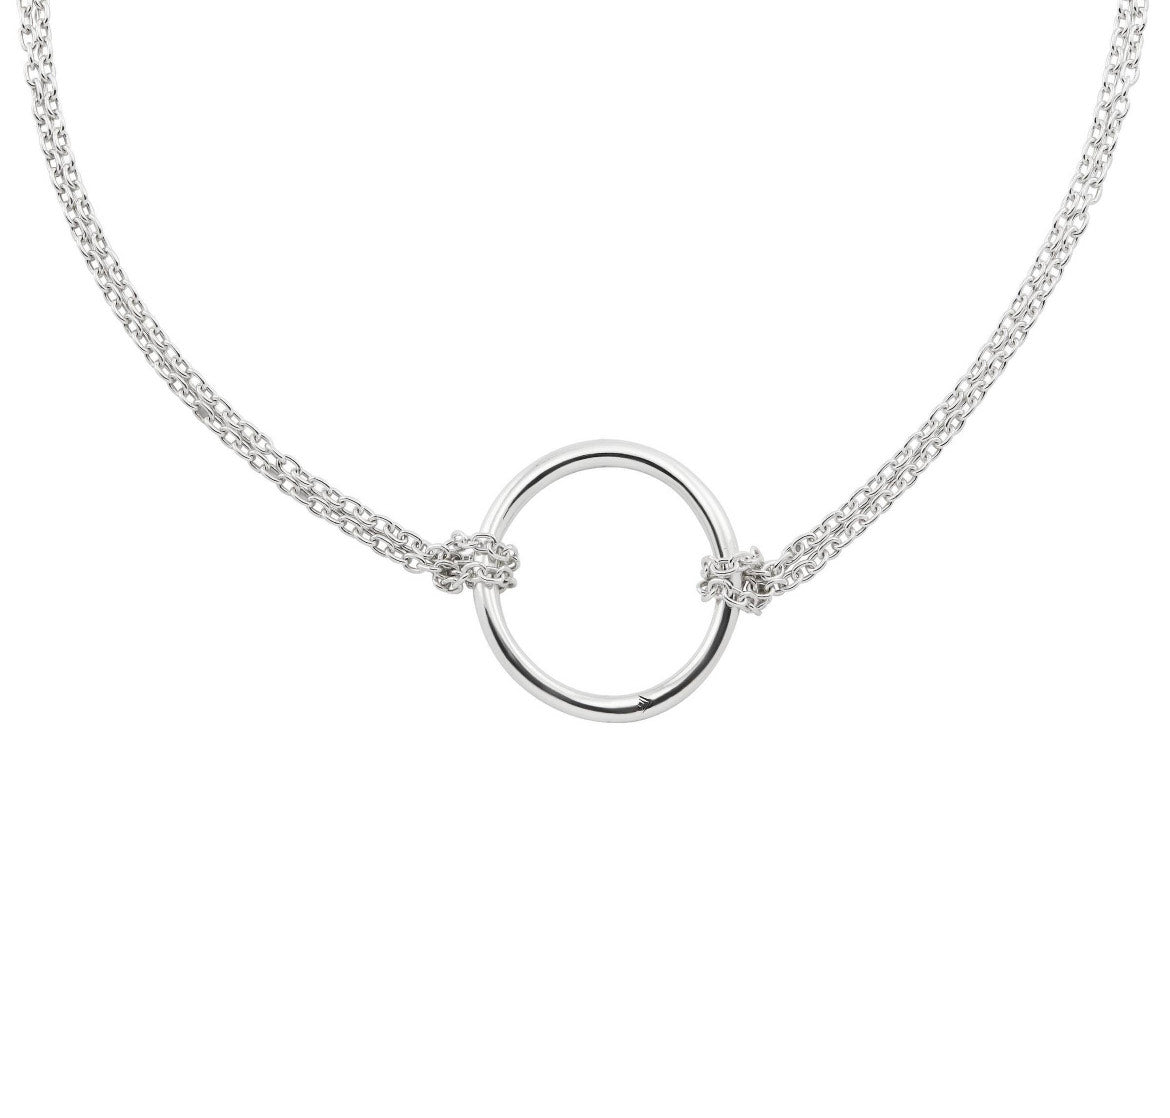 Silpada 'Karma Central' Choker Necklace in Sterling Silver